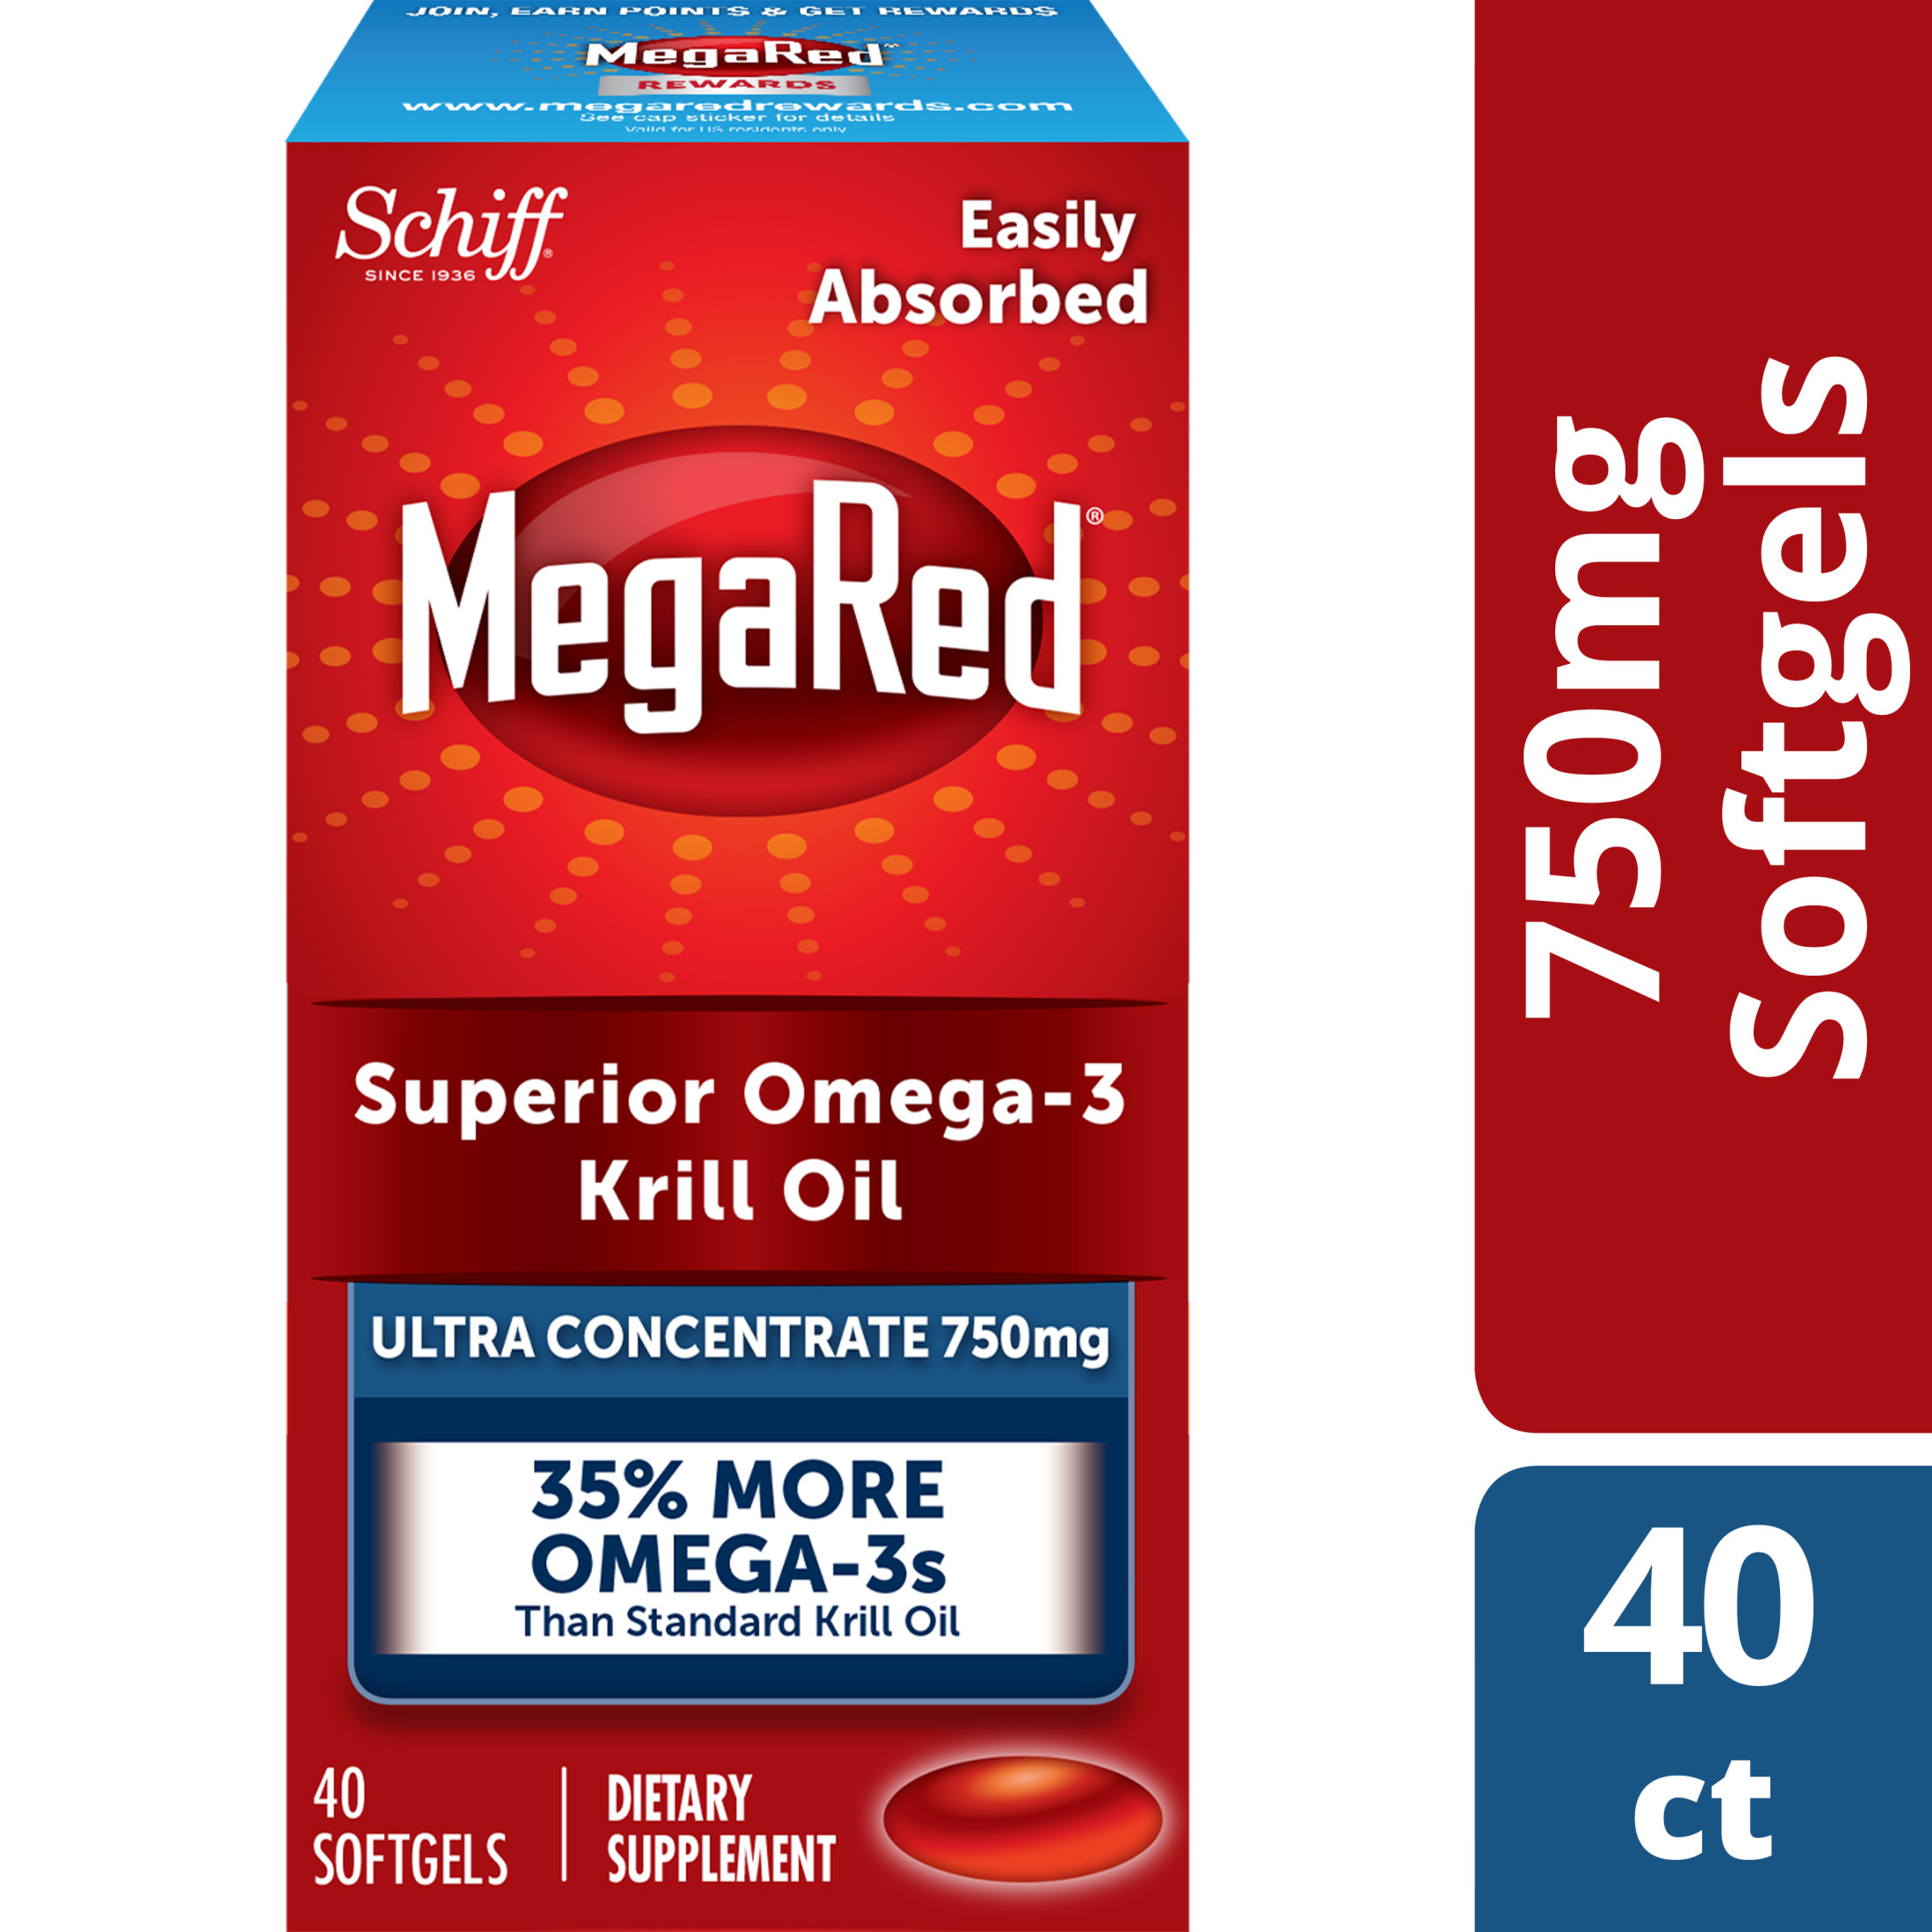 MegaRed 750mg Ultra Concentration Omega-3 Krill Oil, 40 Softgels - image 1 of 4